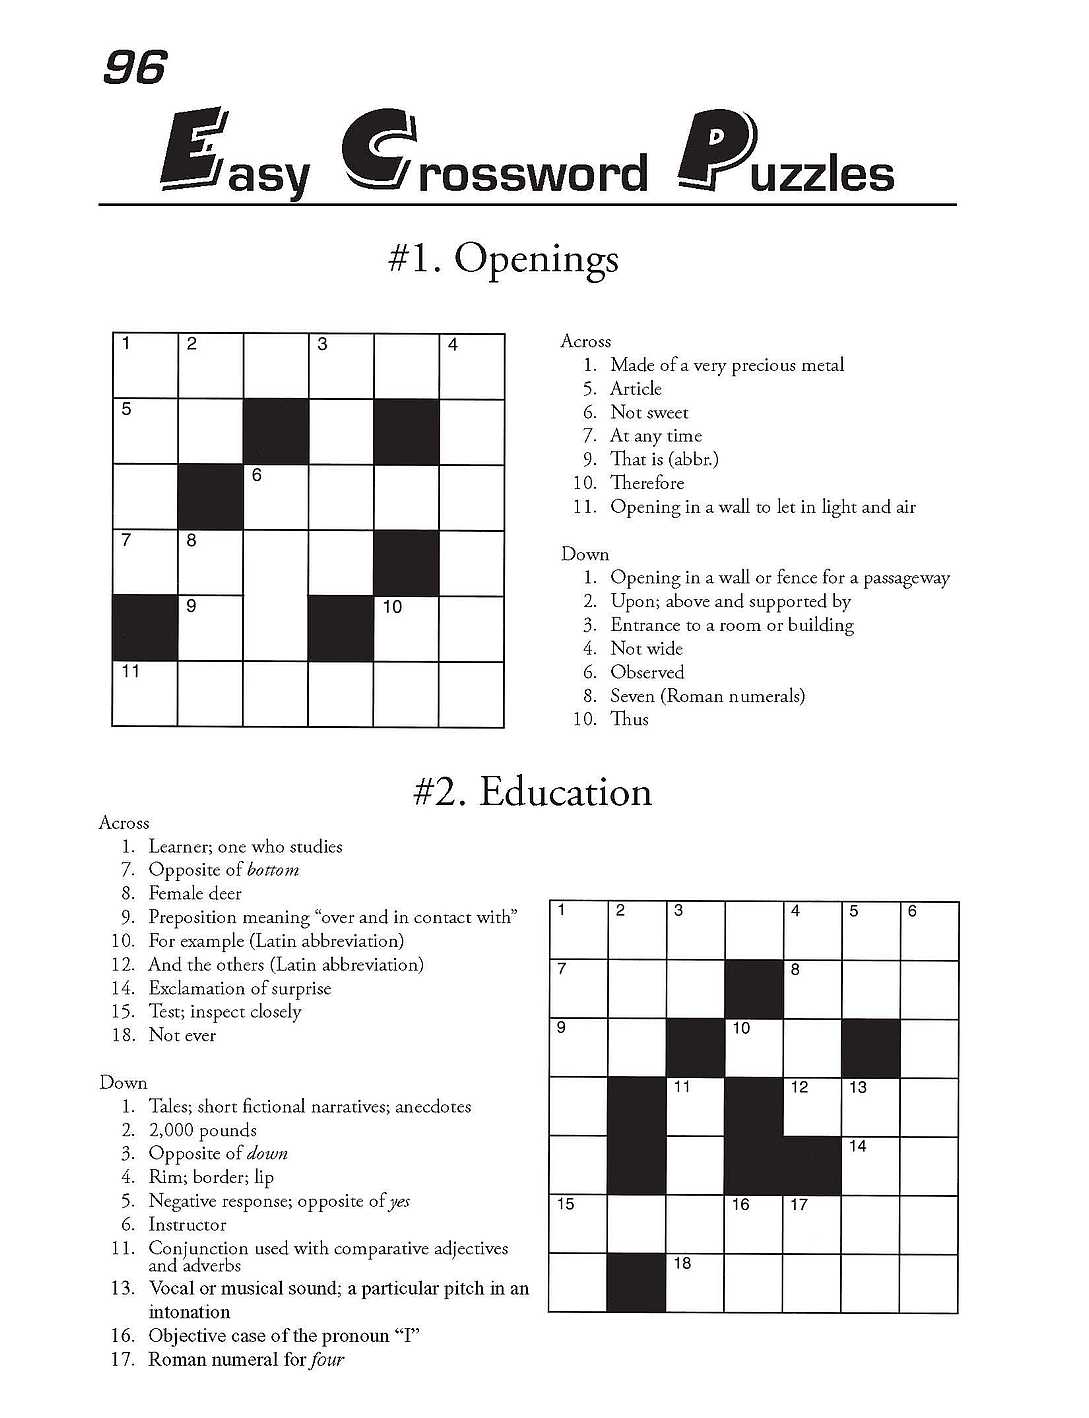 usa today crosswords from win98 computer